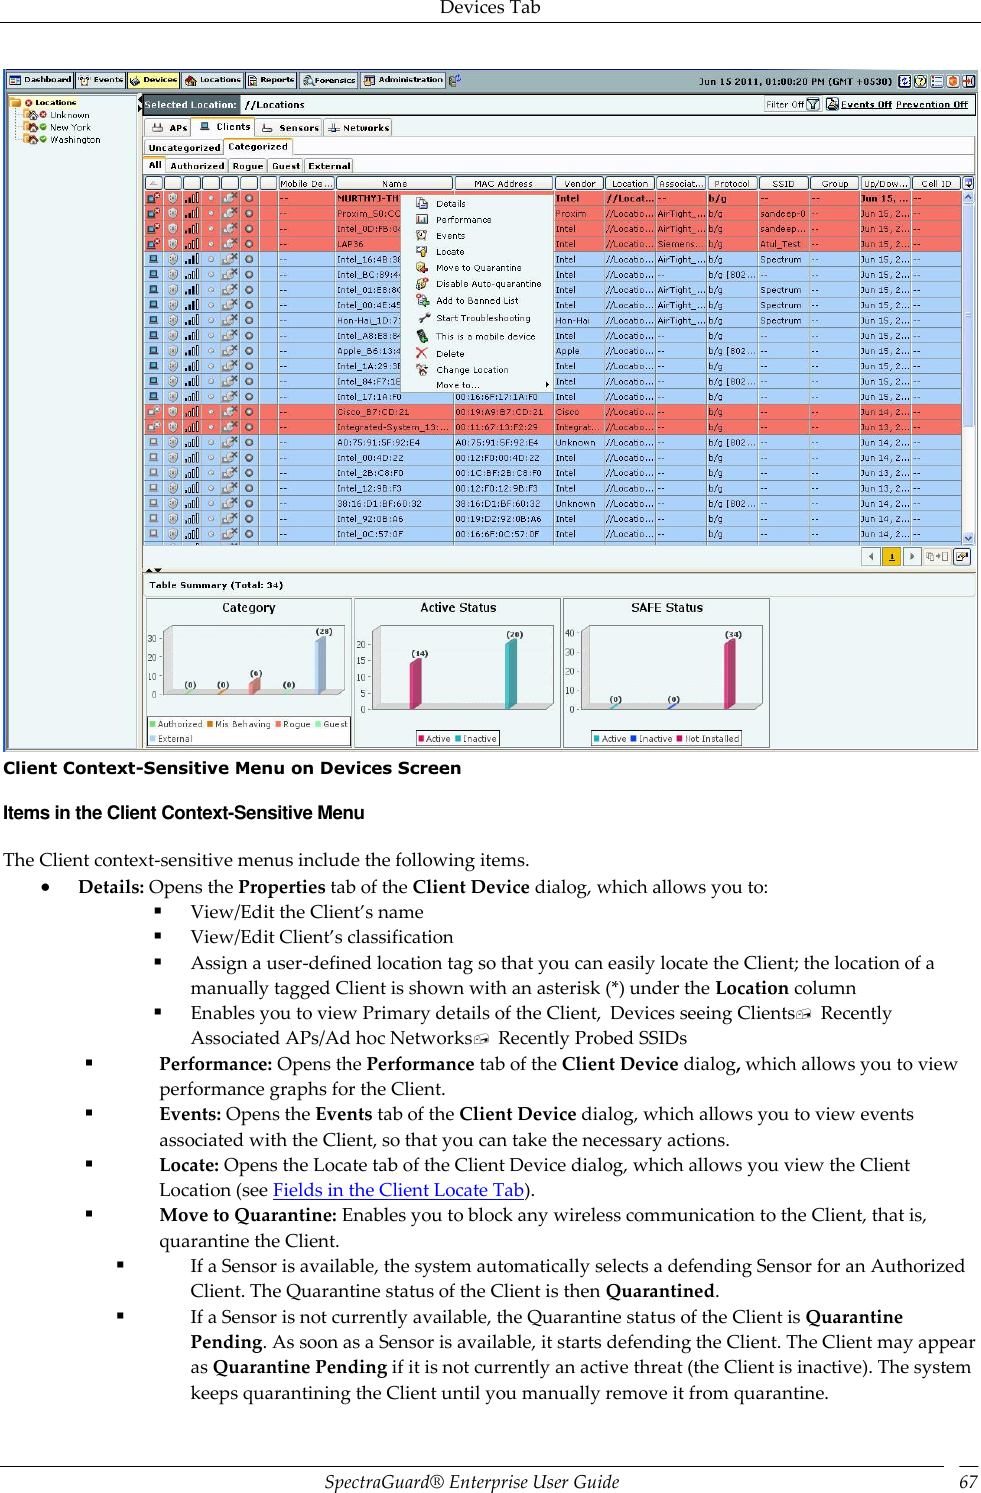 Devices Tab SpectraGuard®  Enterprise User Guide 67  Client Context-Sensitive Menu on Devices Screen Items in the Client Context-Sensitive Menu The Client context-sensitive menus include the following items.  Details: Opens the Properties tab of the Client Device dialog, which allows you to:  View/Edit the Client’s name  View/Edit Client’s classification  Assign a user-defined location tag so that you can easily locate the Client; the location of a manually tagged Client is shown with an asterisk (*) under the Location column  Enables you to view Primary details of the Client,  Devices seeing Clients  Recently Associated APs/Ad hoc Networks  Recently Probed SSIDs  Performance: Opens the Performance tab of the Client Device dialog, which allows you to view performance graphs for the Client.  Events: Opens the Events tab of the Client Device dialog, which allows you to view events associated with the Client, so that you can take the necessary actions.  Locate: Opens the Locate tab of the Client Device dialog, which allows you view the Client Location (see Fields in the Client Locate Tab).  Move to Quarantine: Enables you to block any wireless communication to the Client, that is, quarantine the Client.  If a Sensor is available, the system automatically selects a defending Sensor for an Authorized Client. The Quarantine status of the Client is then Quarantined.  If a Sensor is not currently available, the Quarantine status of the Client is Quarantine Pending. As soon as a Sensor is available, it starts defending the Client. The Client may appear as Quarantine Pending if it is not currently an active threat (the Client is inactive). The system keeps quarantining the Client until you manually remove it from quarantine. 